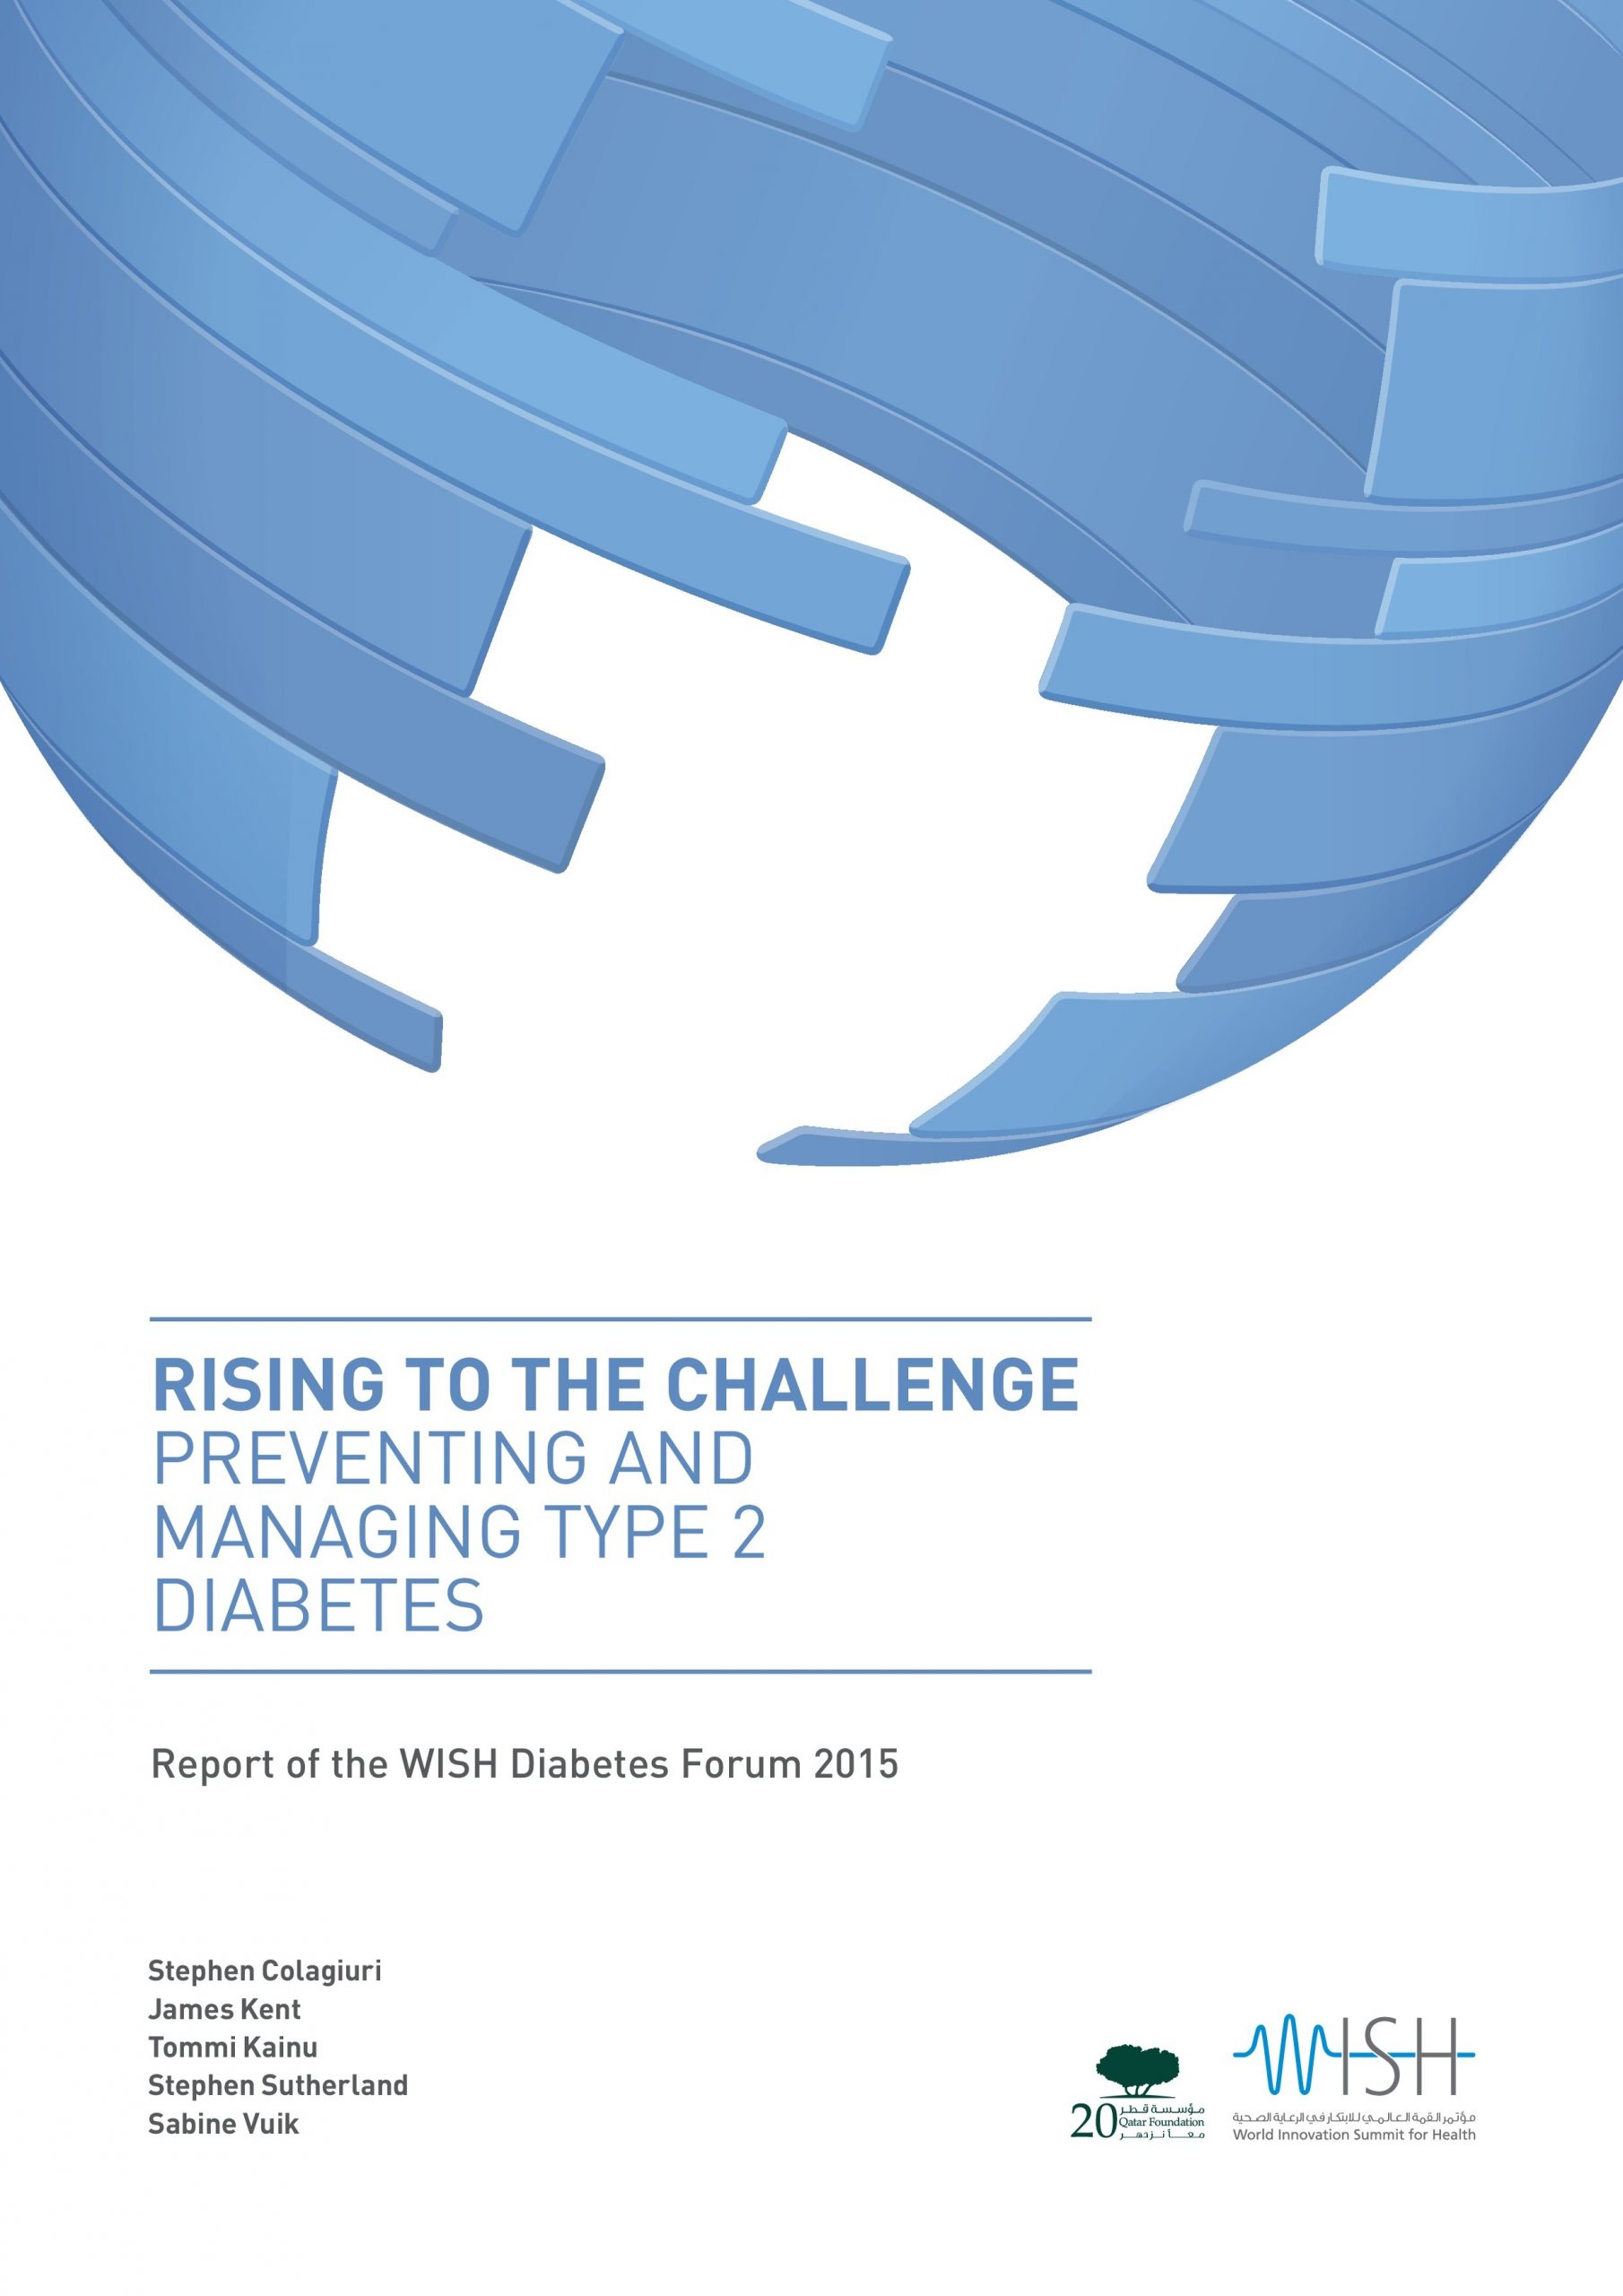 Rising to the Challenge: Preventing and Managing Type 2 Diabetes 